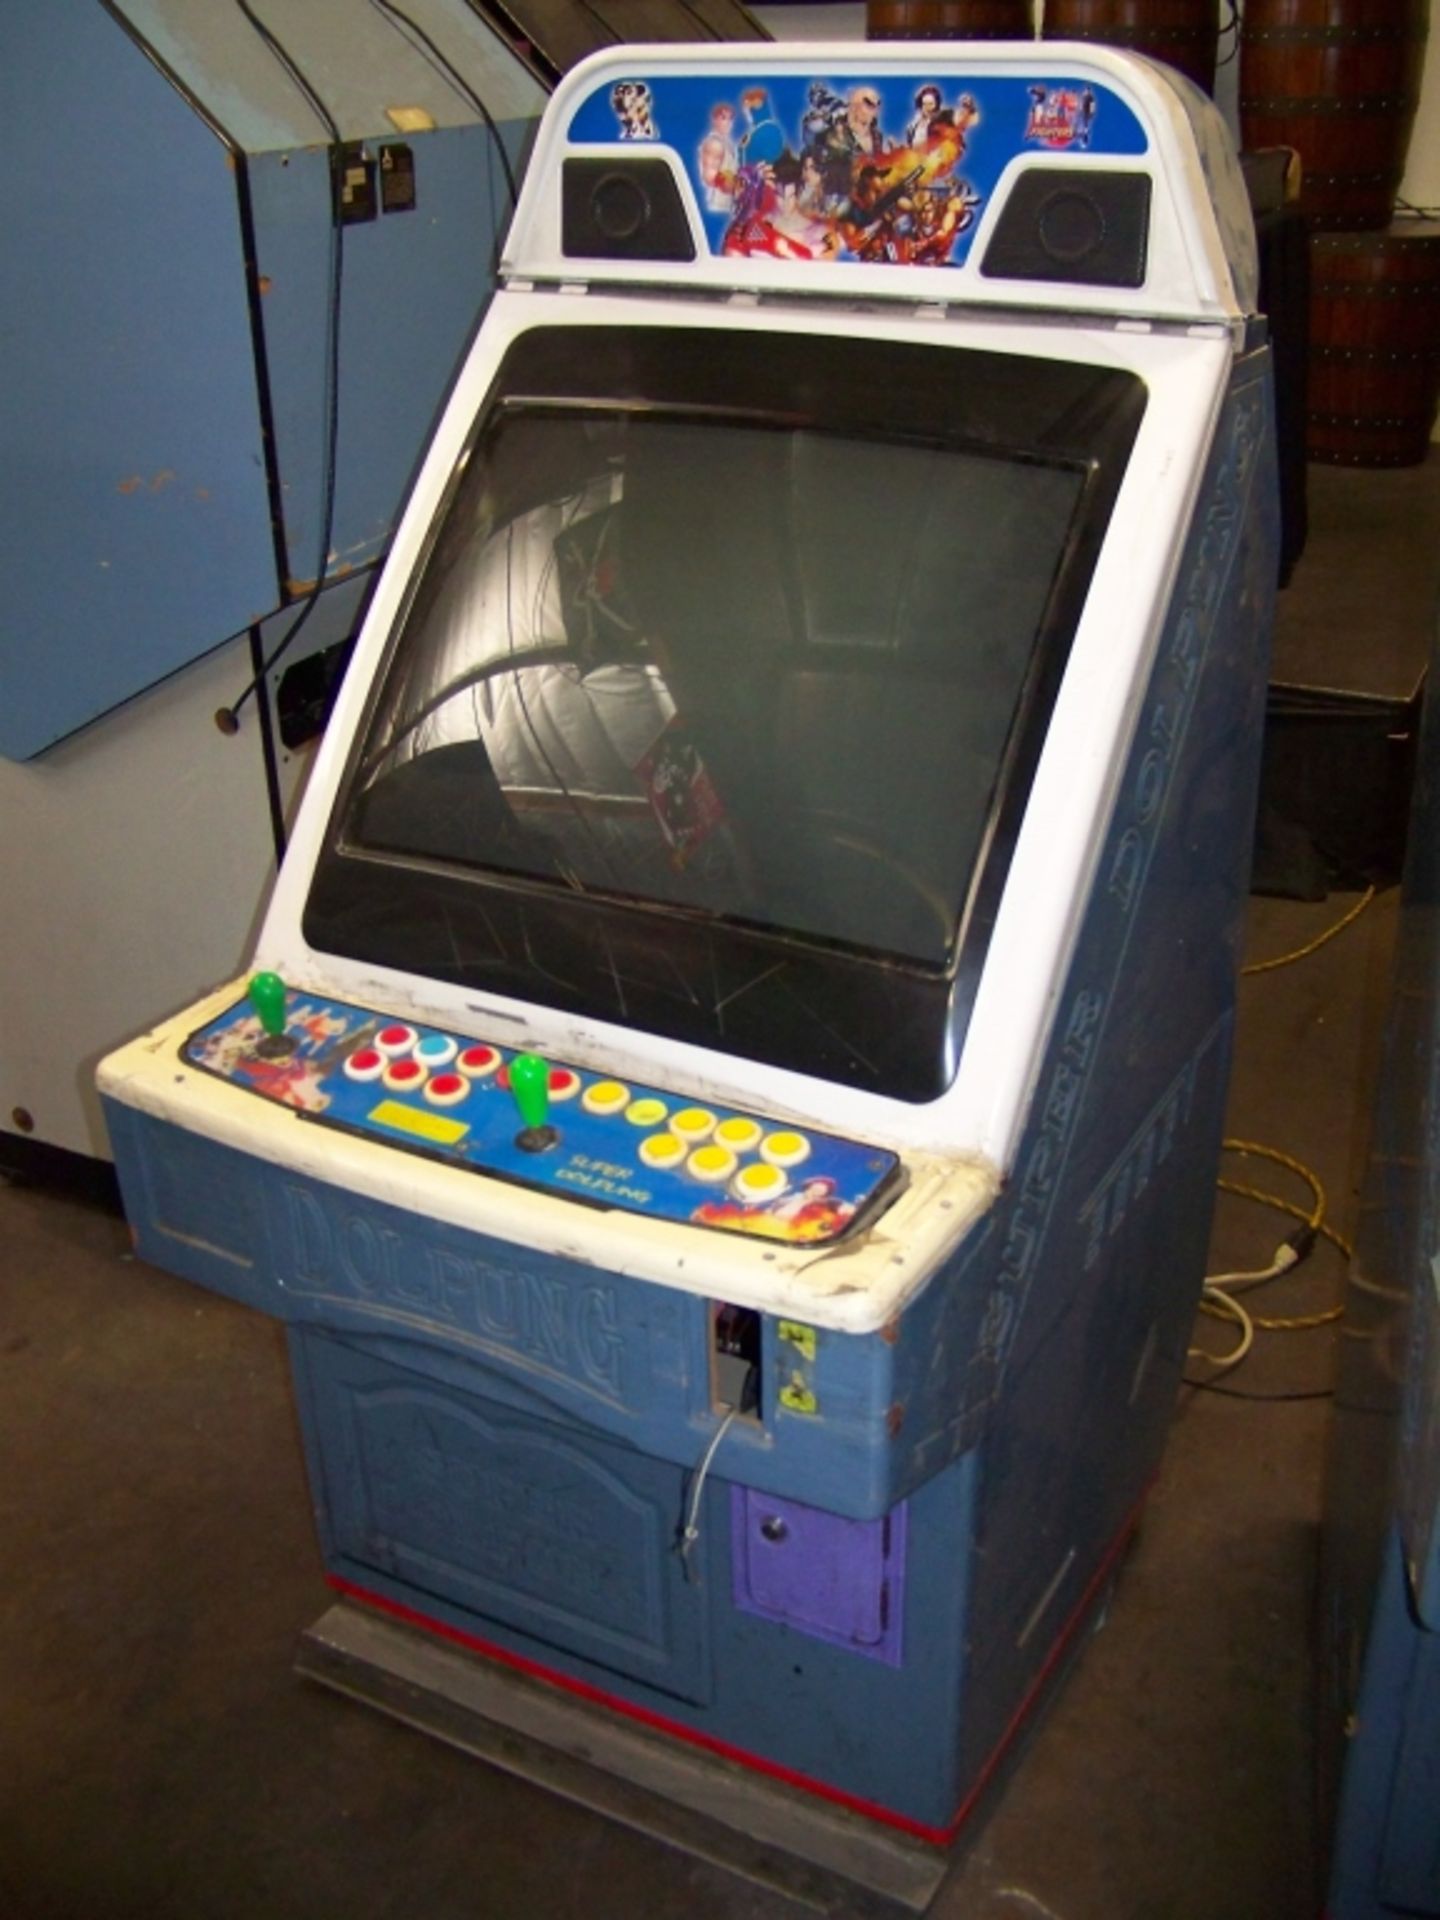 CANDY CABINET STREET FIGHTER 3 JAMMA ARCADE Item is in used condition. Evidence of wear and